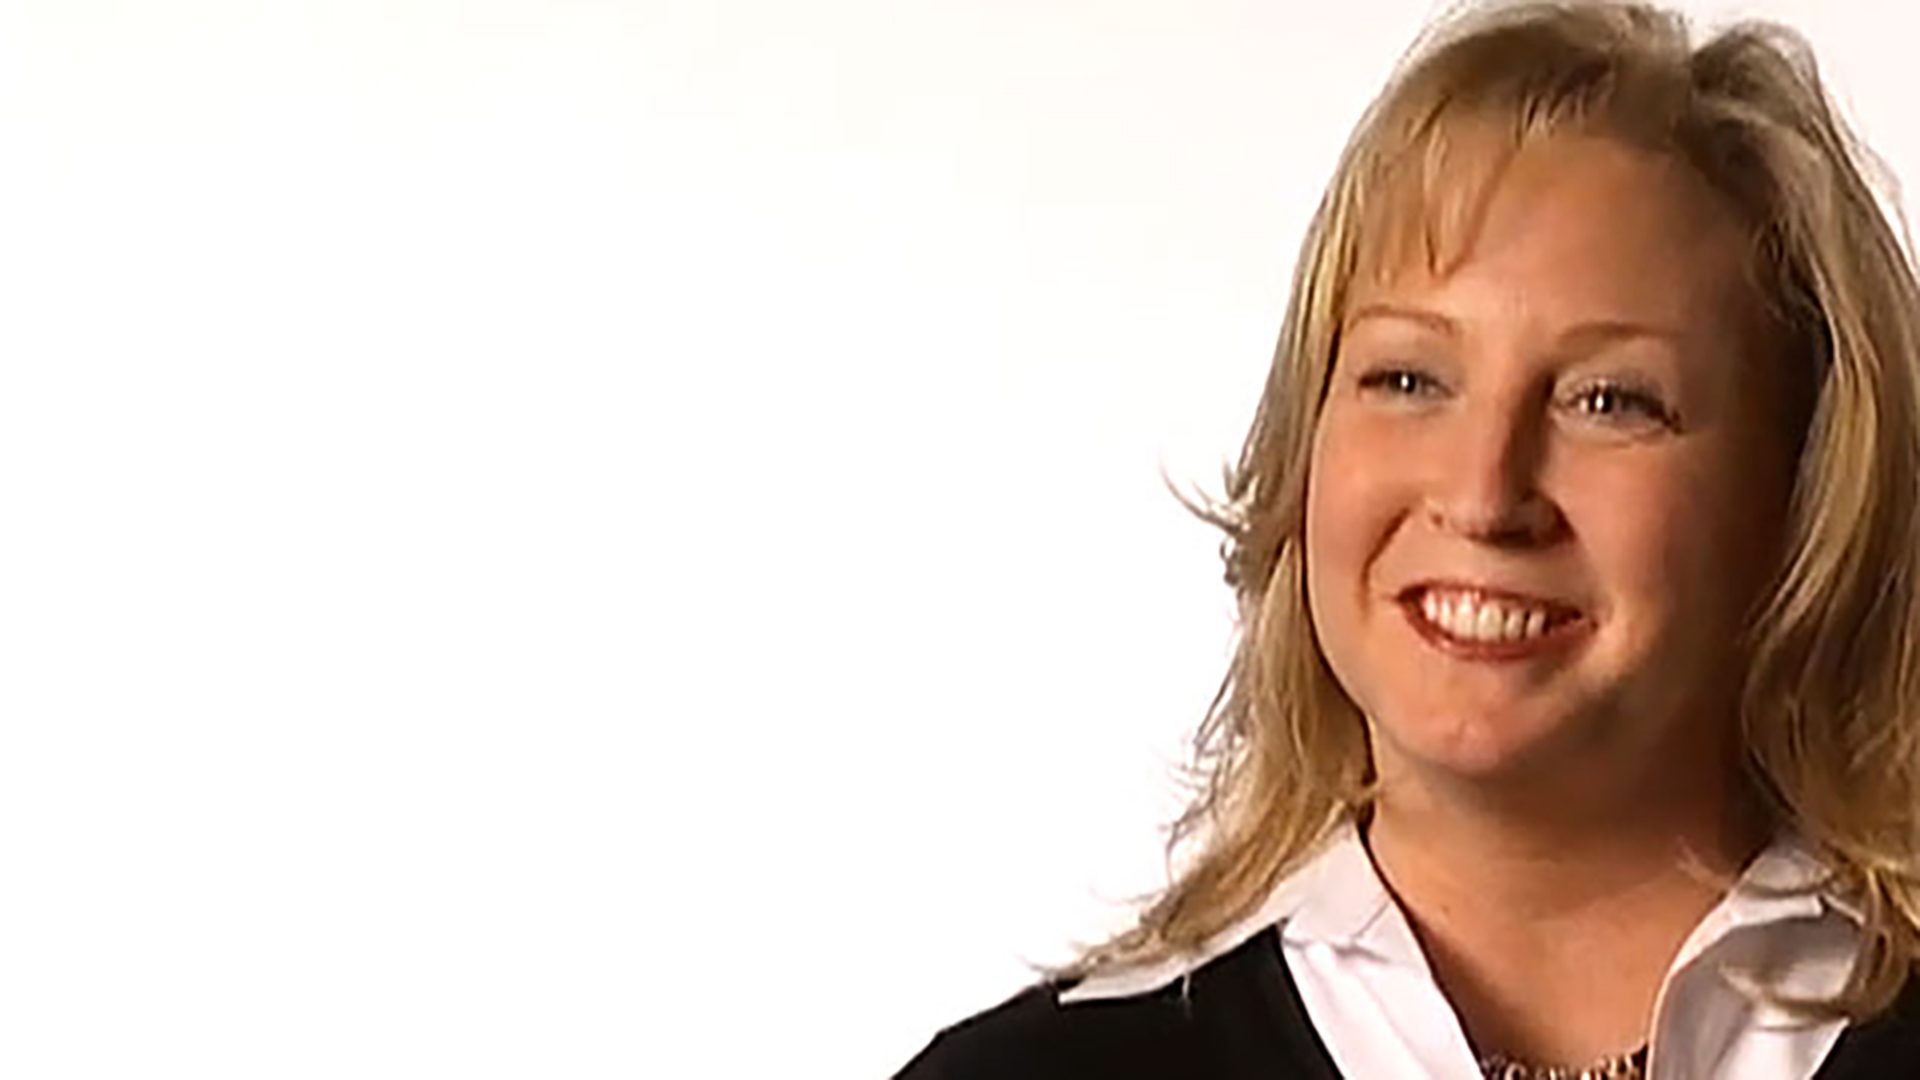 A middle-aged blonde woman wearing professional attire is interviewed against a white background.